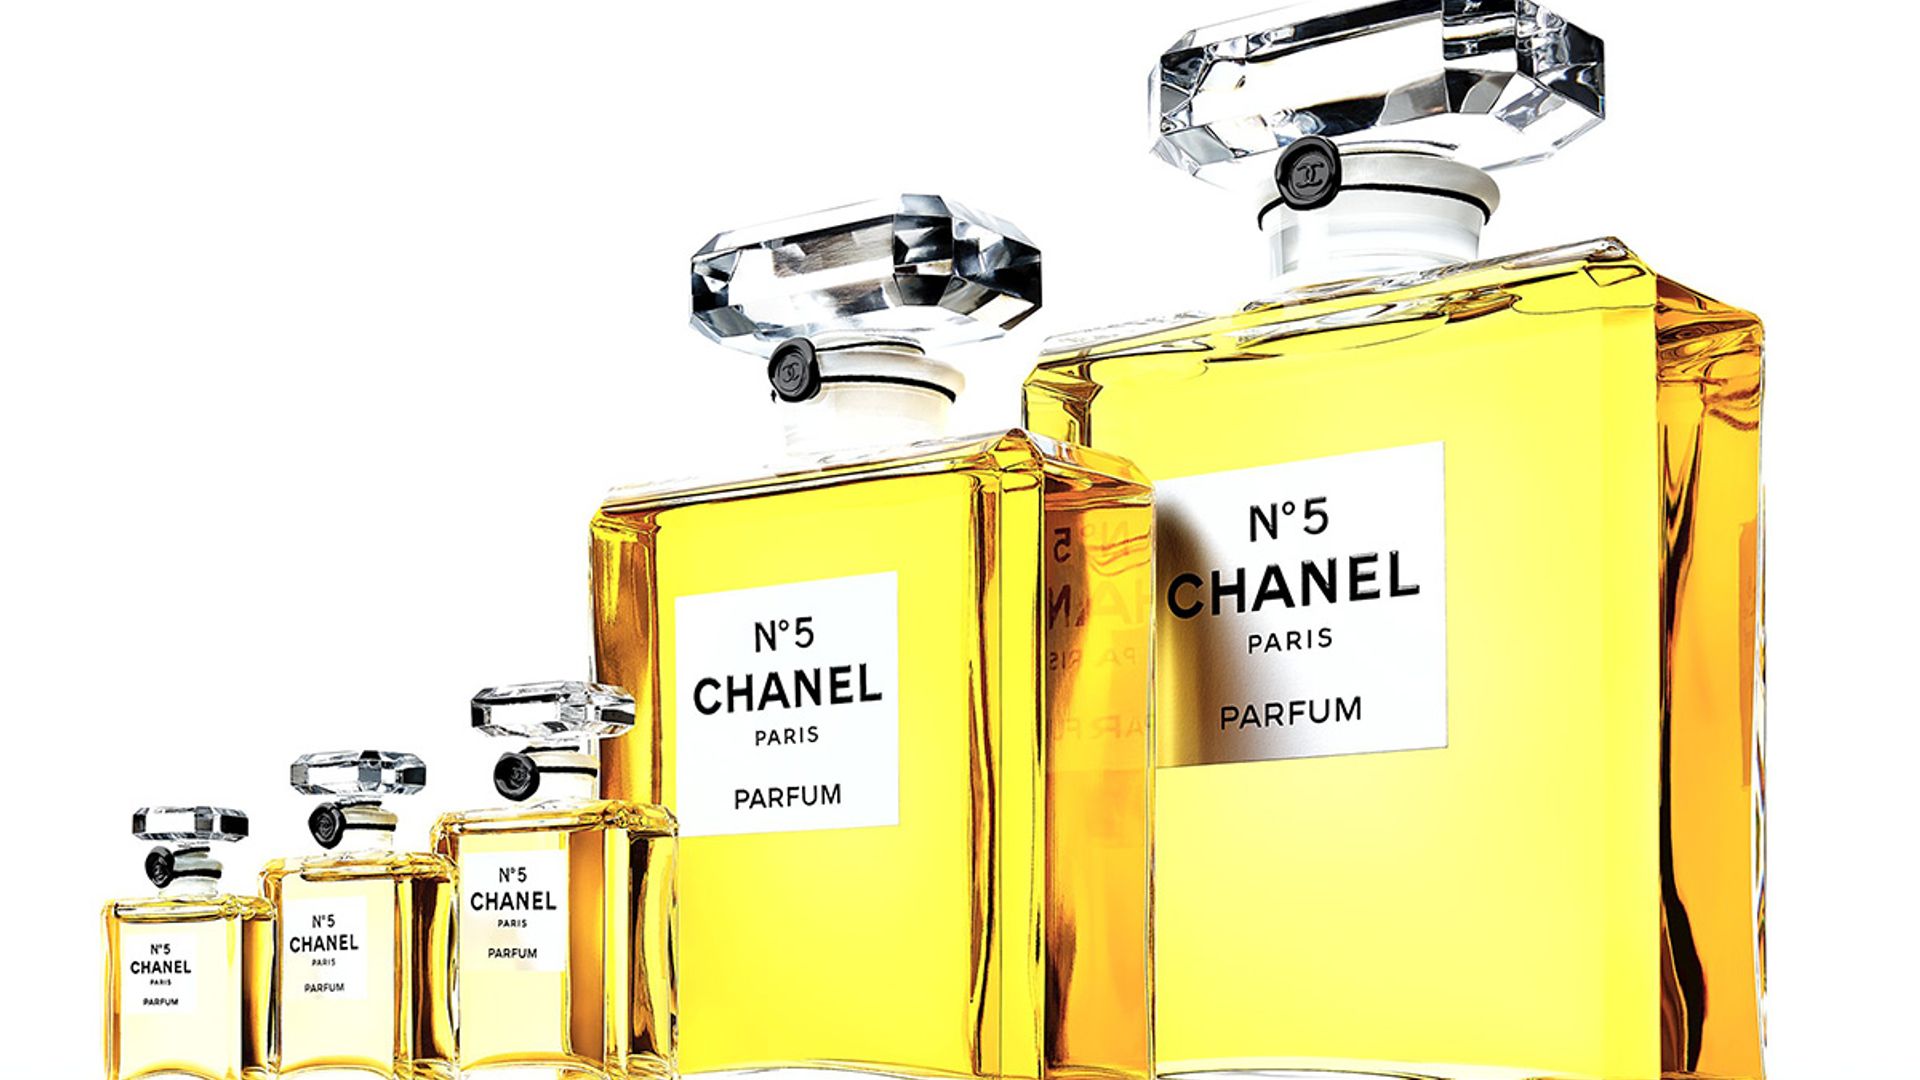 history of Chanel perfume: everything you to about the maison's most famous fragrances | HELLO!